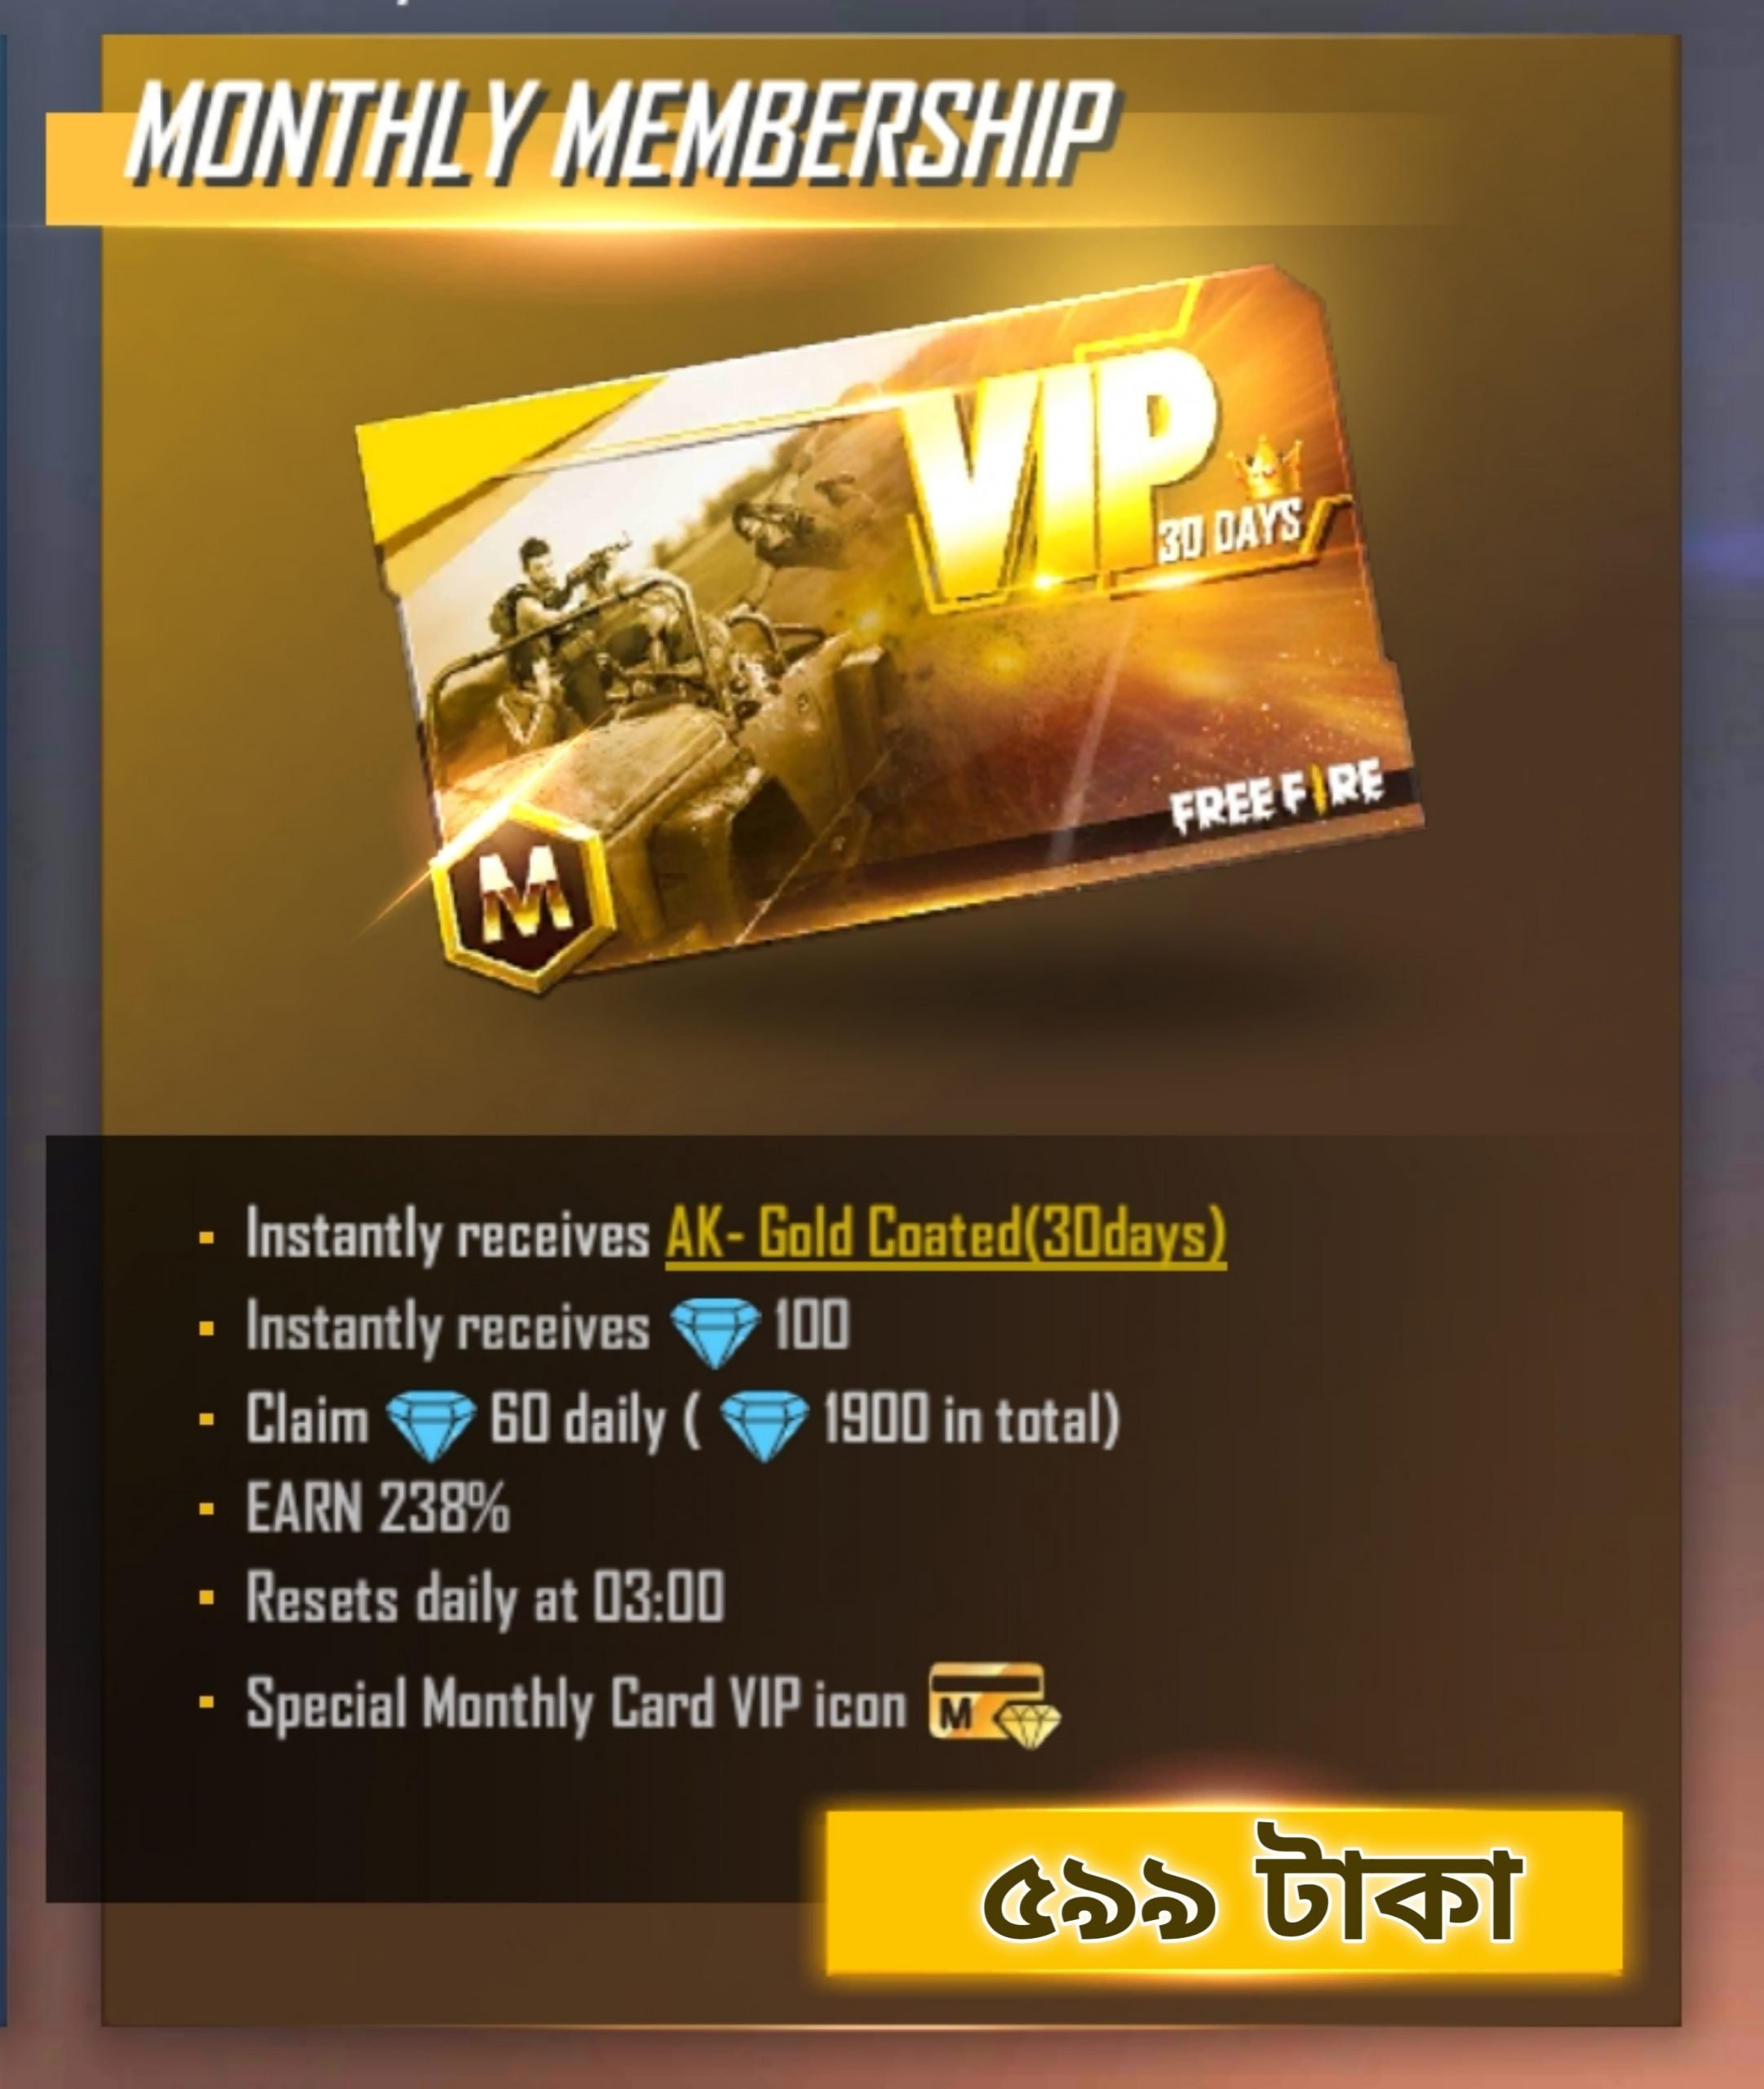 Free Fire Monthly Membership Offer